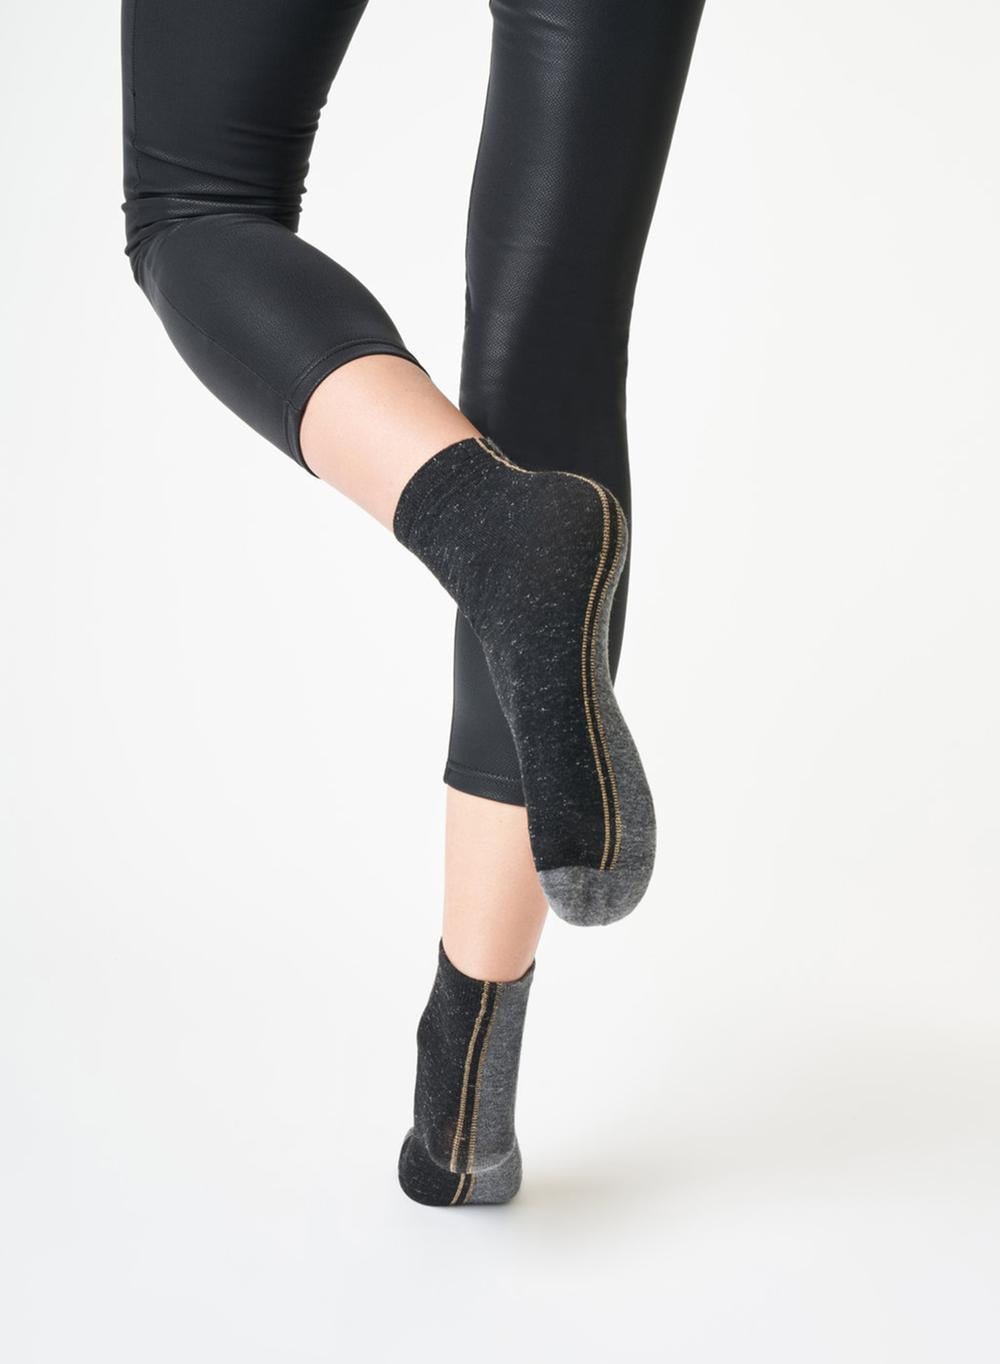 SiSi Double Calzino - Soft viscose mix tube ankle socks with silver lame knitted throughout, black on one side and fleck grey on the other, separated with a silver stripe on one side and gold on the other, can be worn multiple ways.